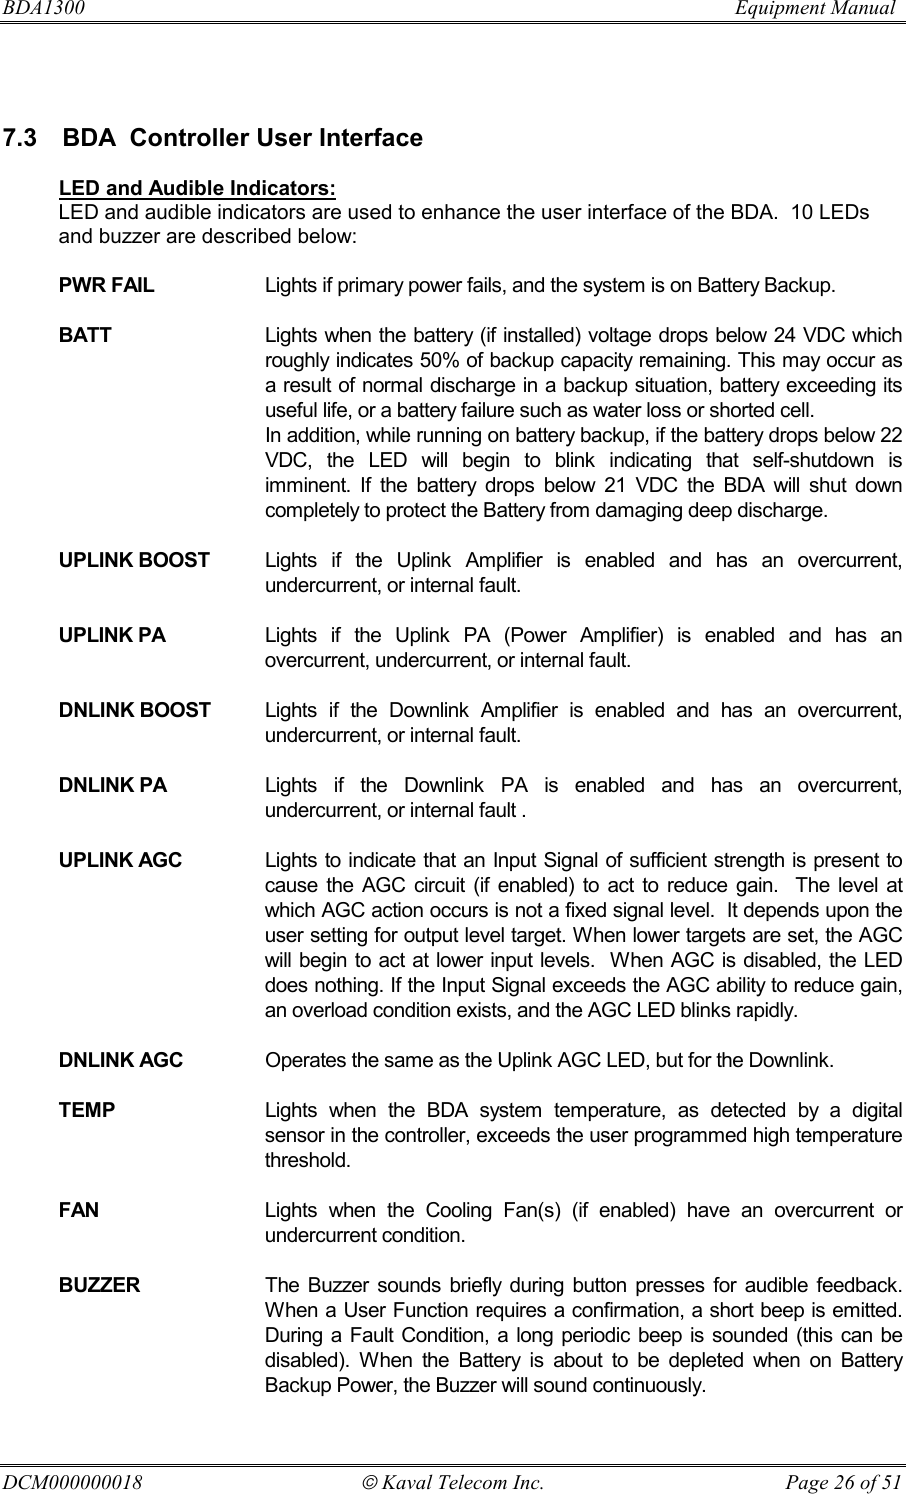 BDA1300                          Equipment Manual DCM000000018  Kaval Telecom Inc.  Page 26 of 51  7.3  BDA  Controller User Interface  LED and Audible Indicators: LED and audible indicators are used to enhance the user interface of the BDA.  10 LEDs and buzzer are described below:  PWR FAIL  Lights if primary power fails, and the system is on Battery Backup.  BATT  Lights when the battery (if installed) voltage drops below 24 VDC which roughly indicates 50% of backup capacity remaining. This may occur as a result of normal discharge in a backup situation, battery exceeding its useful life, or a battery failure such as water loss or shorted cell.   In addition, while running on battery backup, if the battery drops below 22 VDC, the LED will begin to blink indicating that self-shutdown is imminent. If the battery drops below 21 VDC the BDA will shut down completely to protect the Battery from damaging deep discharge.  UPLINK BOOST  Lights if the Uplink Amplifier is enabled and has an overcurrent, undercurrent, or internal fault.  UPLINK PA  Lights if the Uplink PA (Power Amplifier) is enabled and has an overcurrent, undercurrent, or internal fault.  DNLINK BOOST  Lights if the Downlink Amplifier is enabled and has an overcurrent, undercurrent, or internal fault.  DNLINK PA  Lights if the Downlink PA is enabled and has an overcurrent, undercurrent, or internal fault .  UPLINK AGC  Lights to indicate that an Input Signal of sufficient strength is present to cause the AGC circuit (if enabled) to act to reduce gain.  The level at which AGC action occurs is not a fixed signal level.  It depends upon the user setting for output level target. When lower targets are set, the AGC will begin to act at lower input levels.  When AGC is disabled, the LED does nothing. If the Input Signal exceeds the AGC ability to reduce gain, an overload condition exists, and the AGC LED blinks rapidly.  DNLINK AGC  Operates the same as the Uplink AGC LED, but for the Downlink.  TEMP  Lights when the BDA system temperature, as detected by a digital sensor in the controller, exceeds the user programmed high temperature threshold.  FAN  Lights when the Cooling Fan(s) (if enabled) have an overcurrent or undercurrent condition.  BUZZER  The Buzzer sounds briefly during button presses for audible feedback. When a User Function requires a confirmation, a short beep is emitted. During a Fault Condition, a long periodic beep is sounded (this can be disabled). When the Battery is about to be depleted when on Battery Backup Power, the Buzzer will sound continuously. 